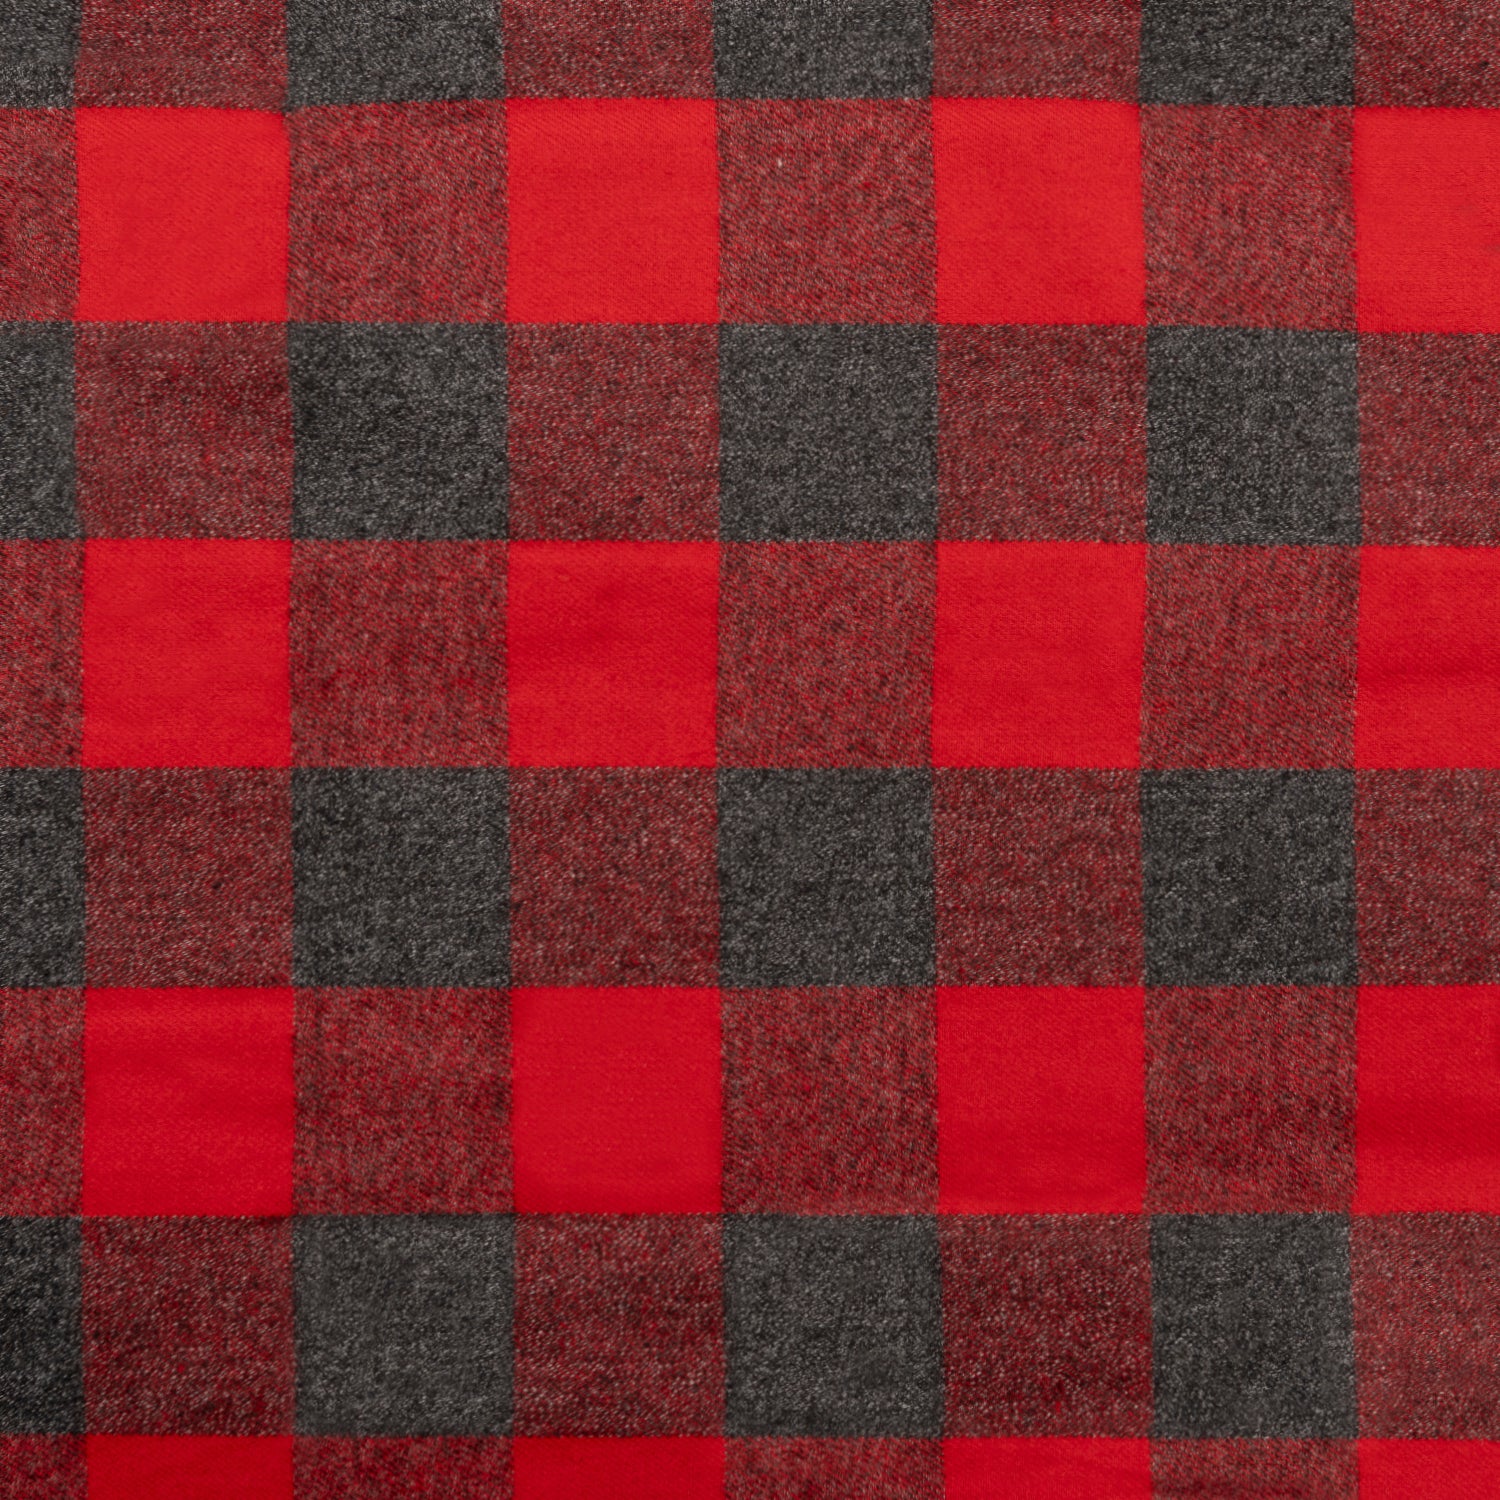 "TRADITIONAL" ONE POCKET FLANNEL